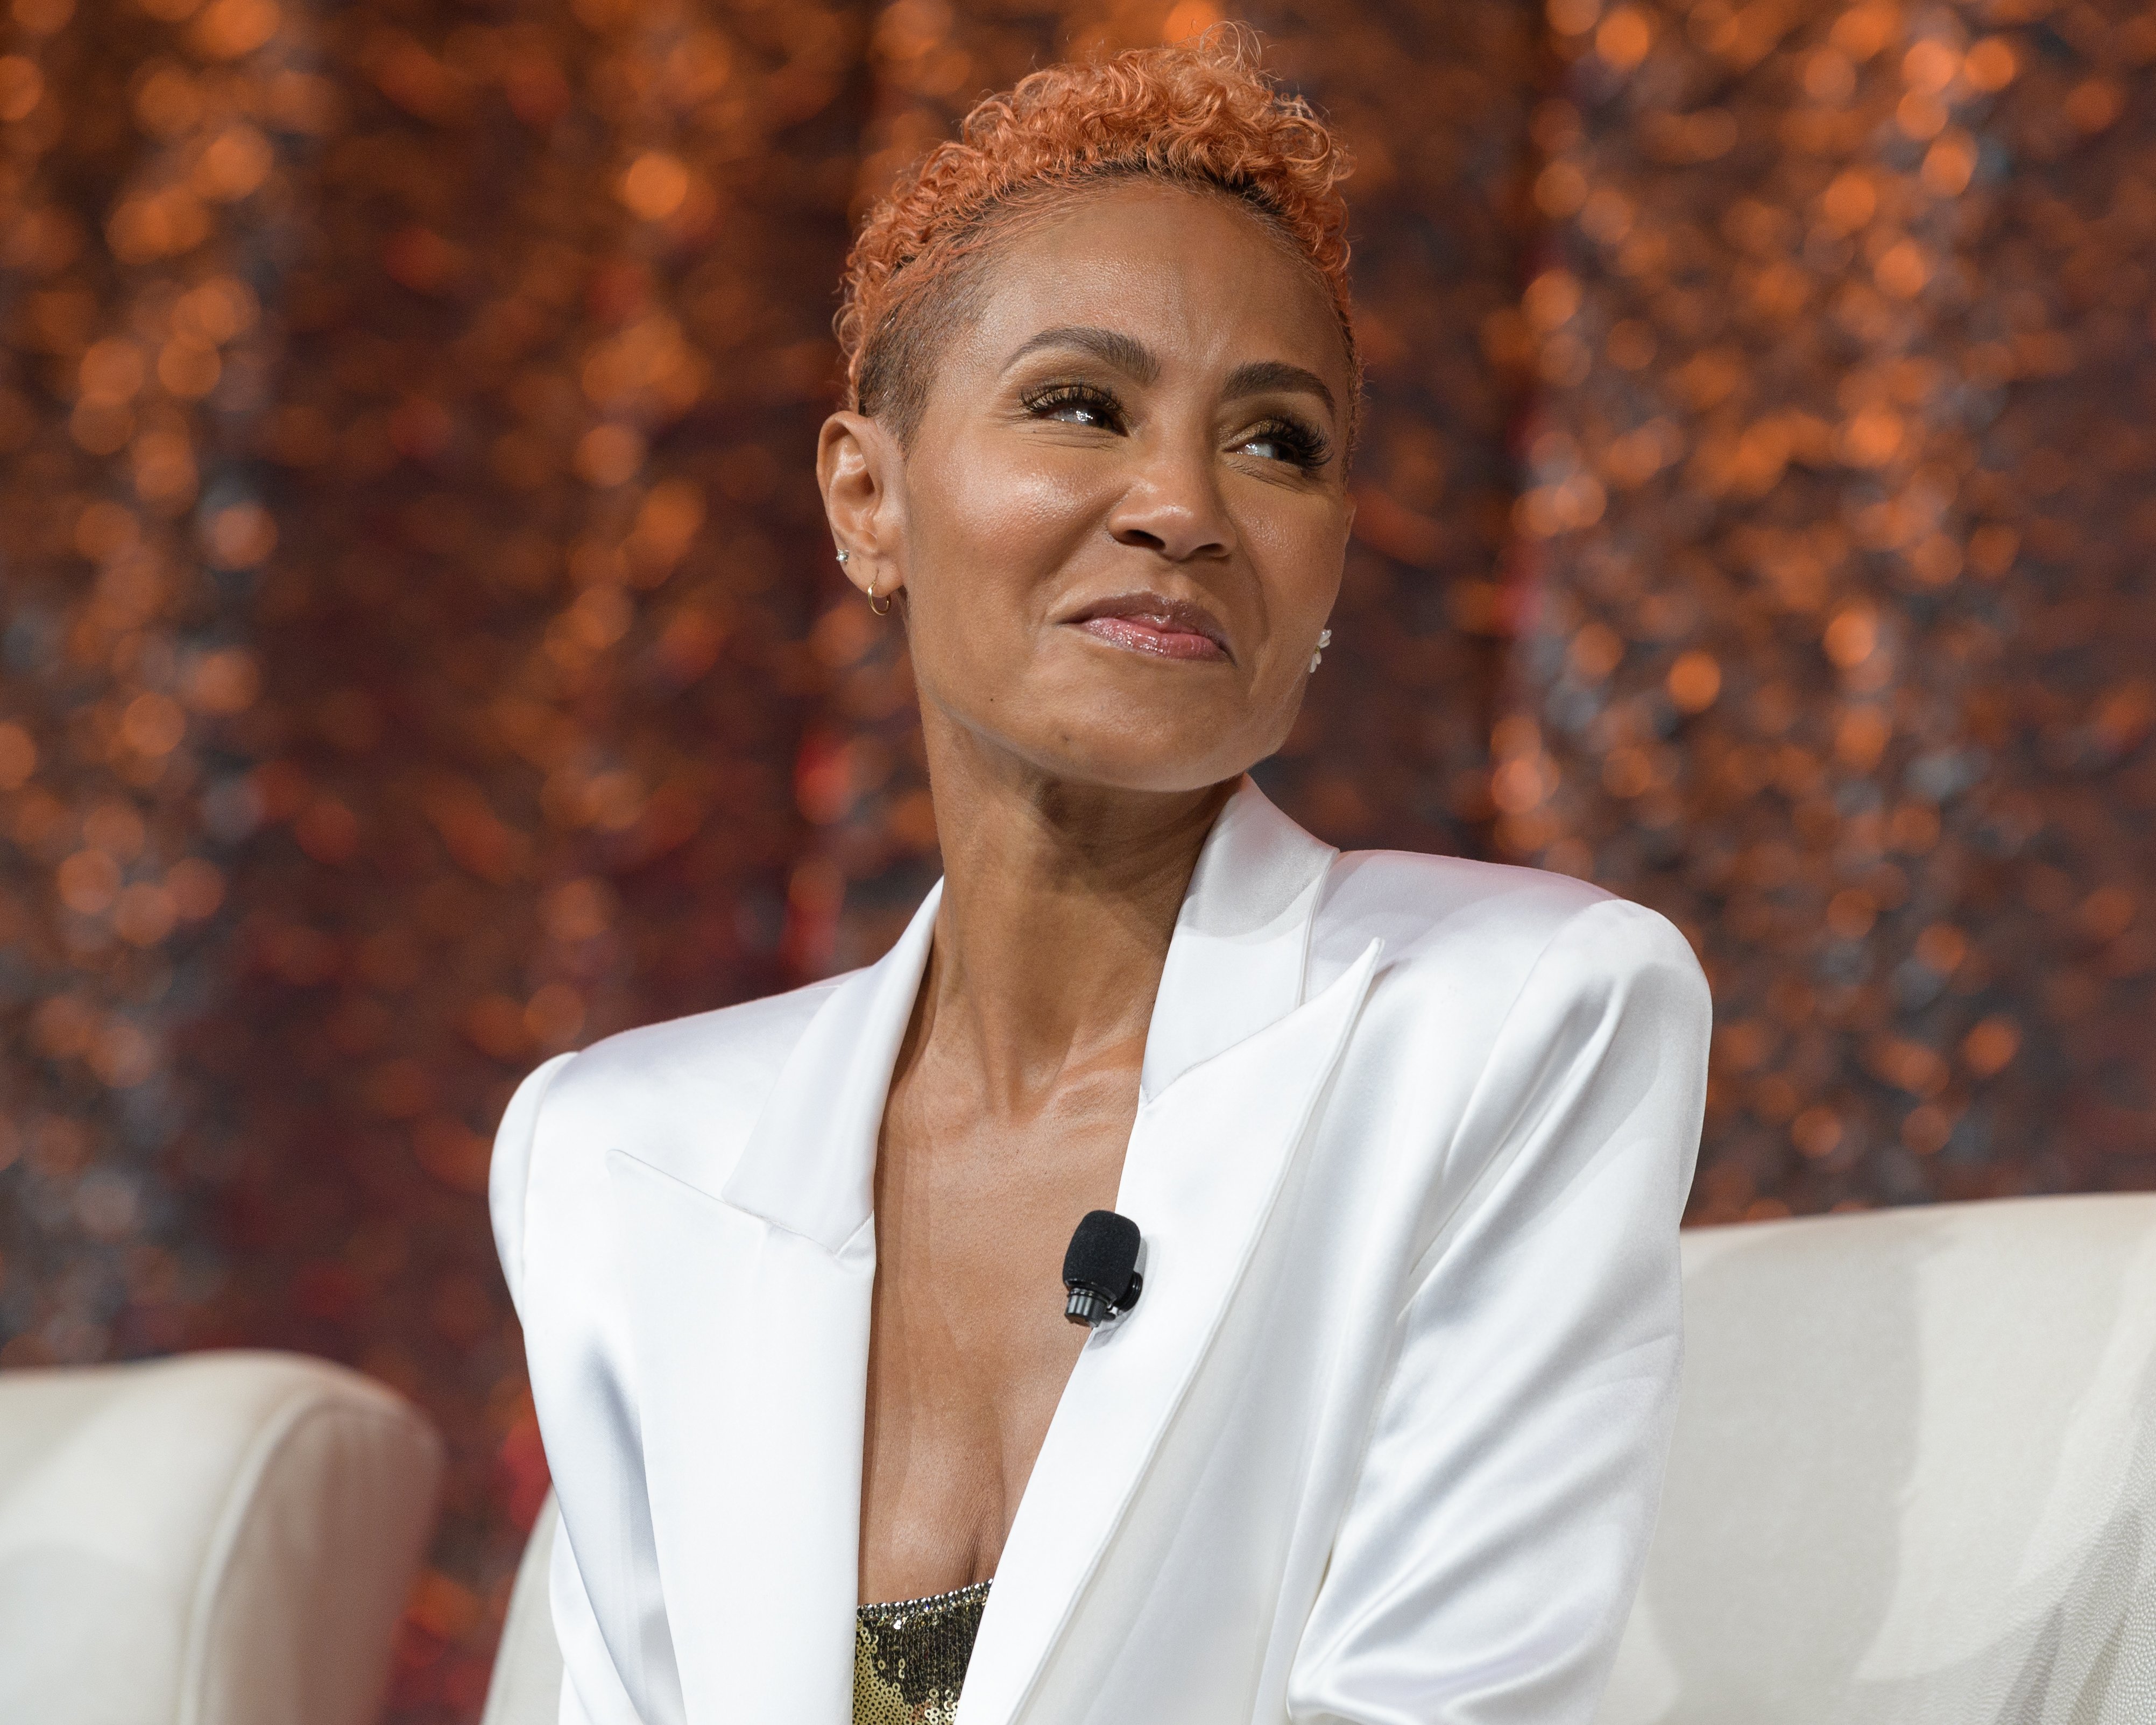 Jada Pinkett Smith speaks on stage during NATPE Miami 2020 - Facebook on January 22, 2020 in Miami Beach, Florida | Photo: Getty Images